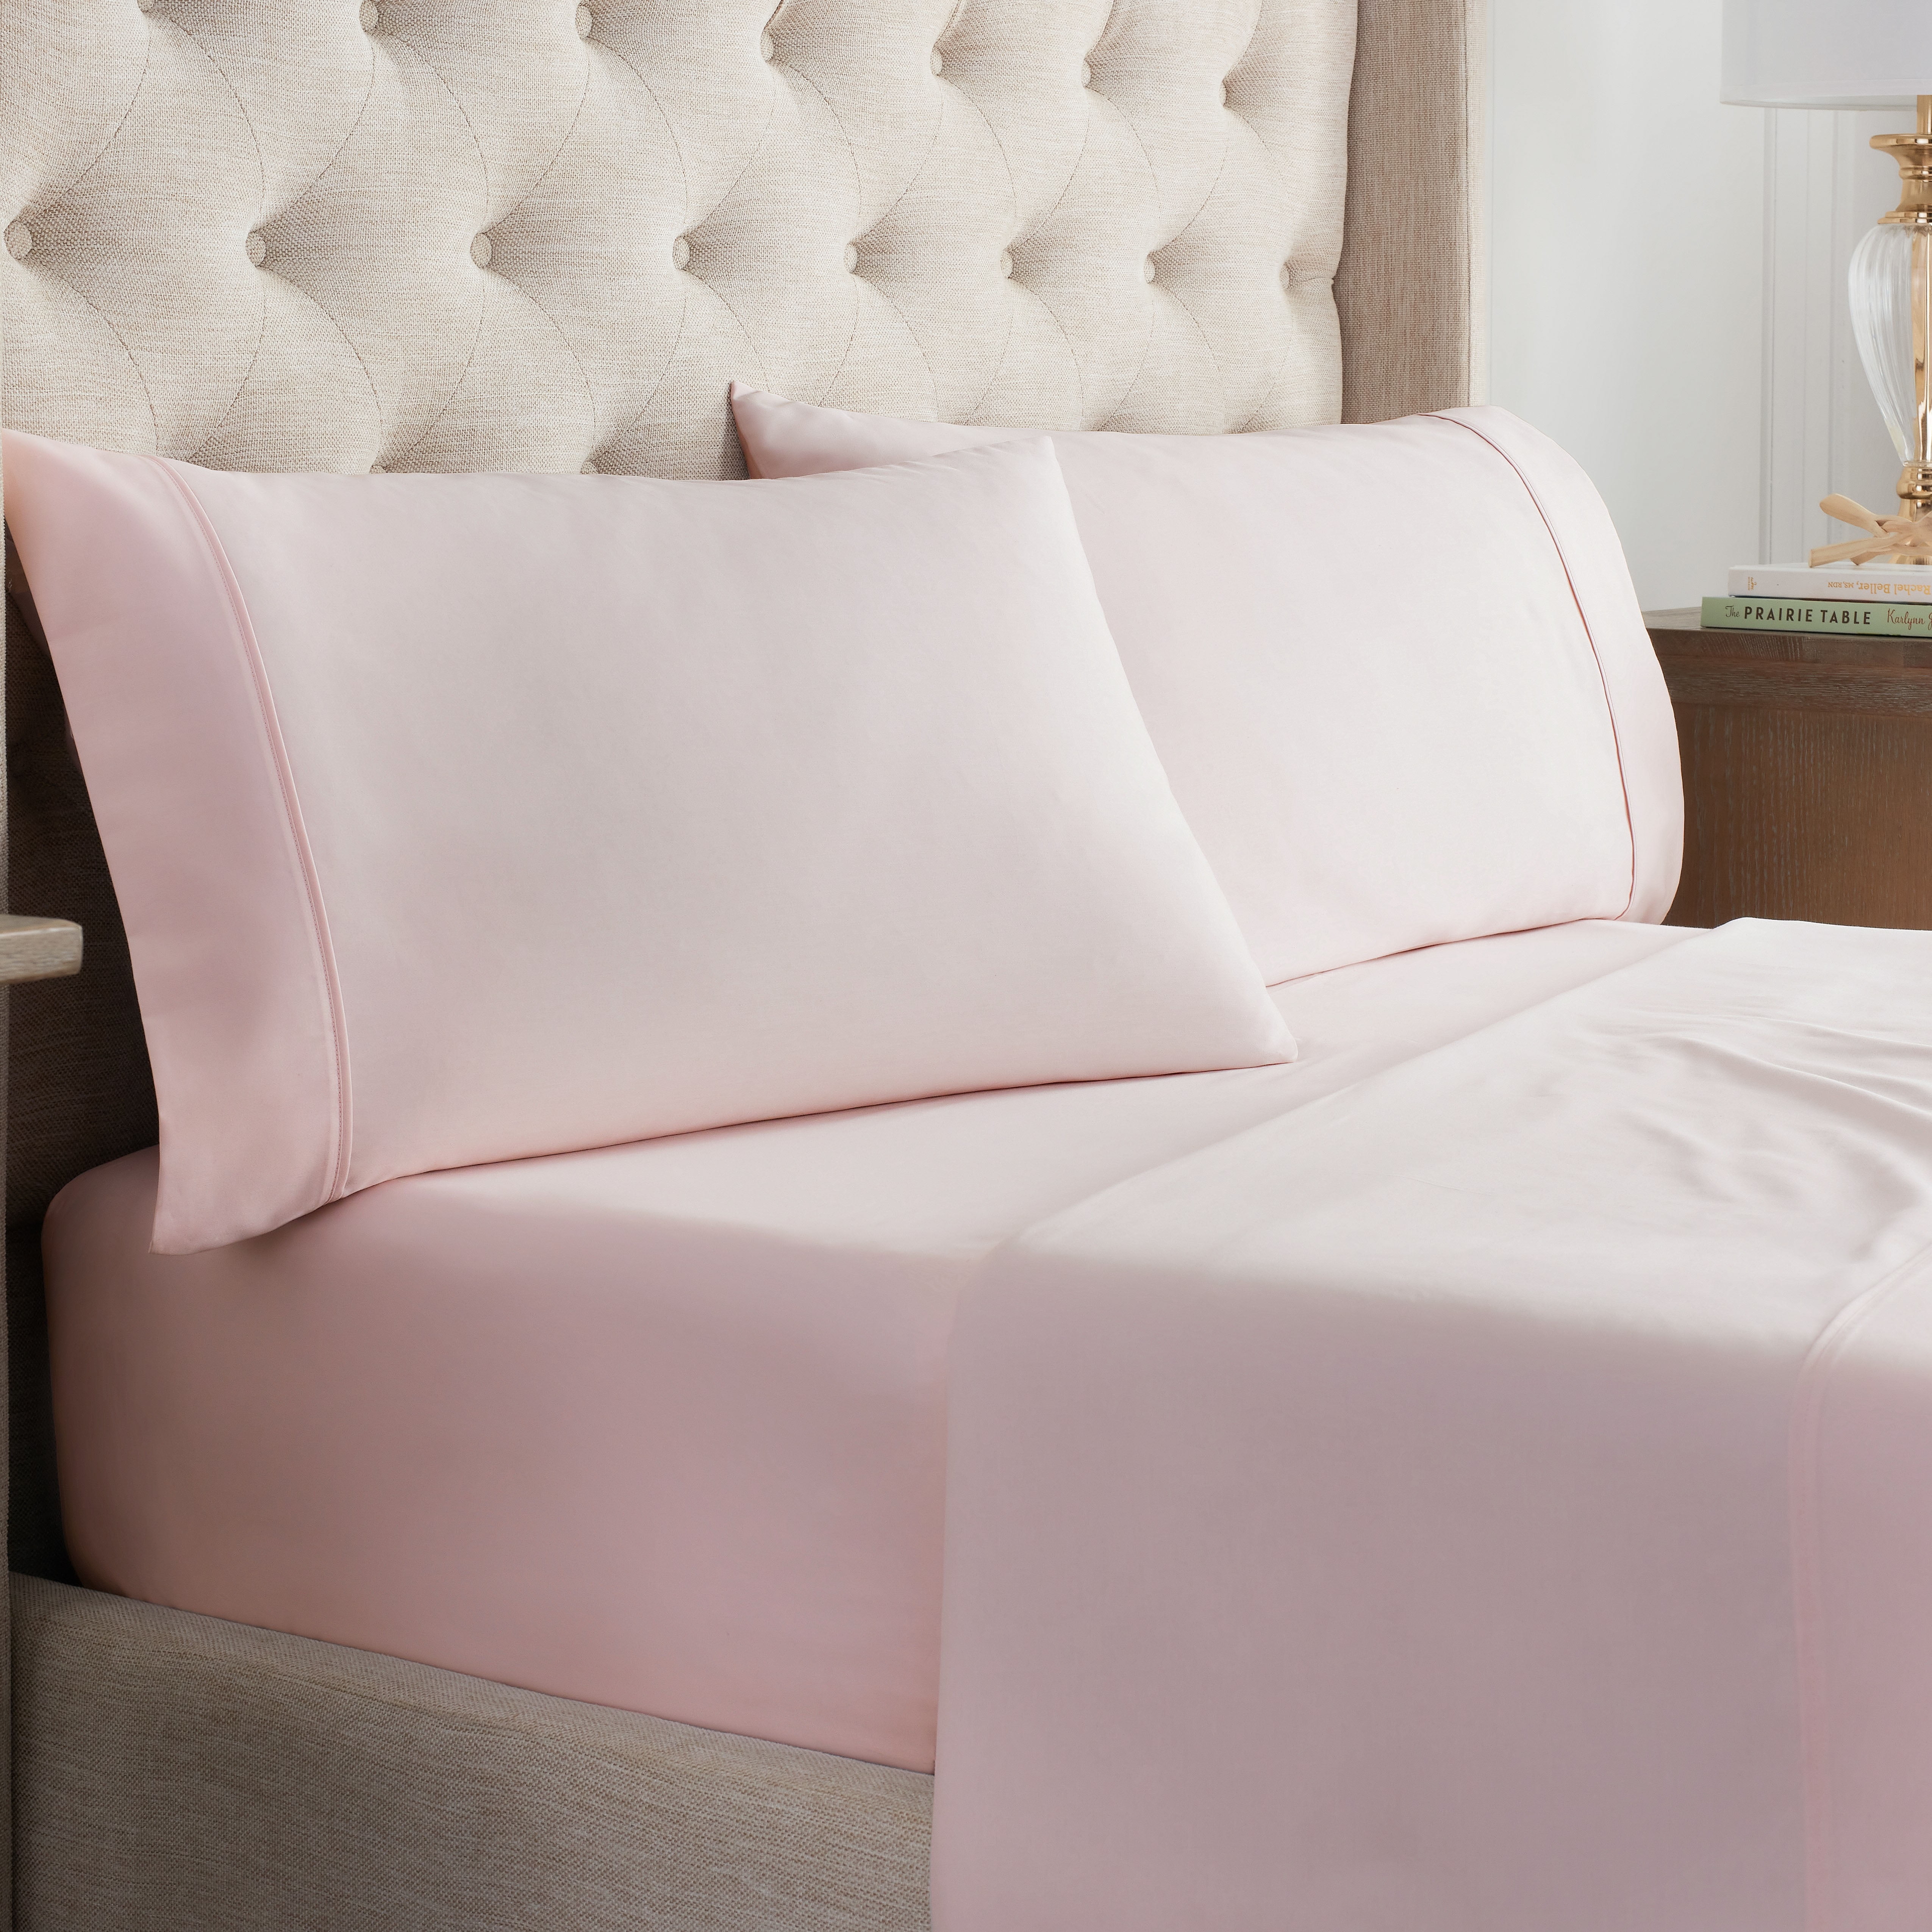 Luxurious Bedding Collection 1200 TC Egyptian Cotton US Sizes Pink Solid 